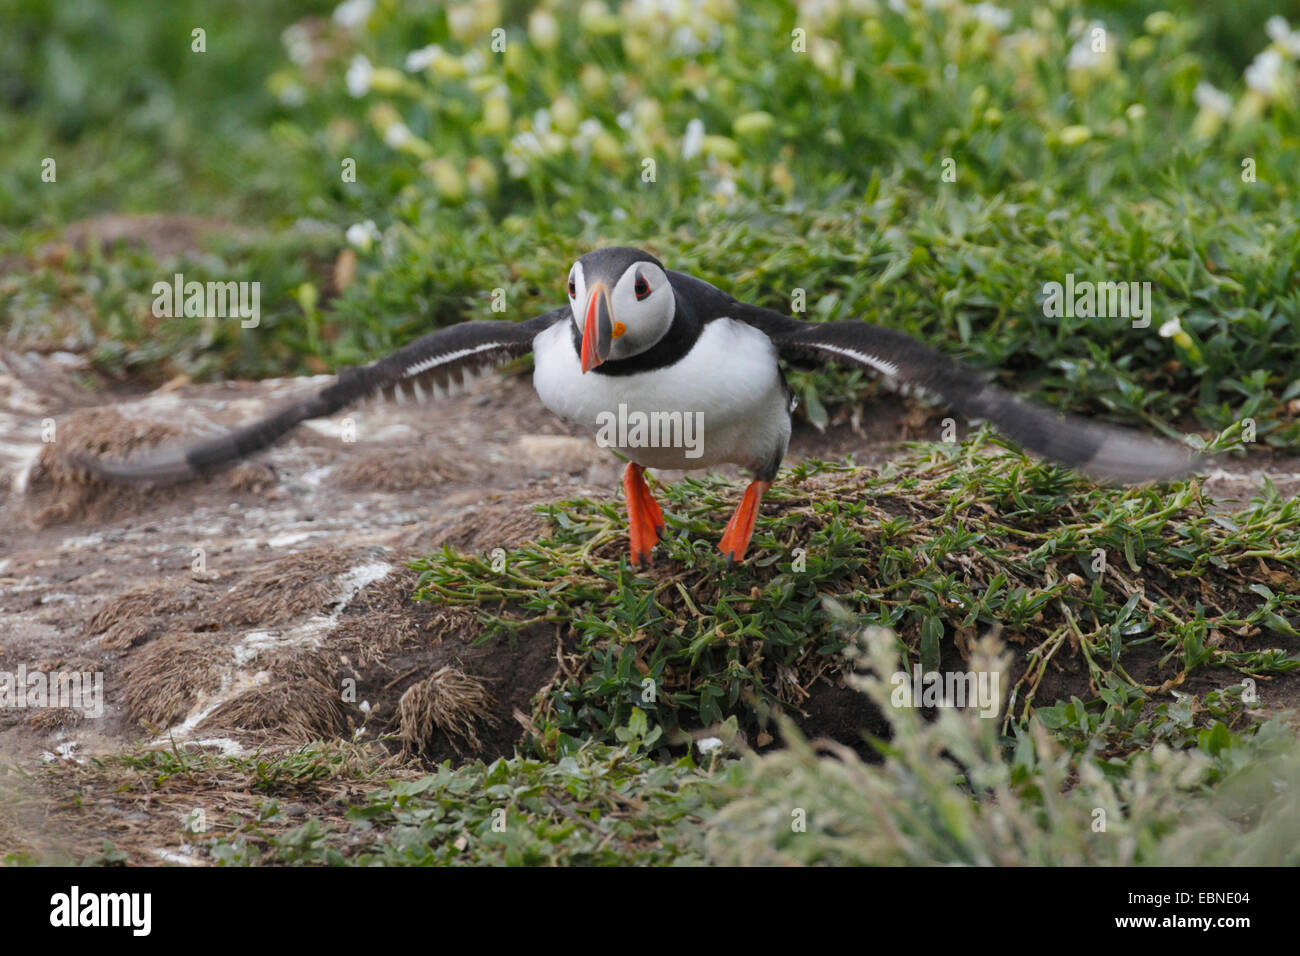 Atlantic puffin, Common puffin (Fratercula arctica), flying up from breeding cave , United Kingdom, England, Farne Islands, Staple Island Stock Photo